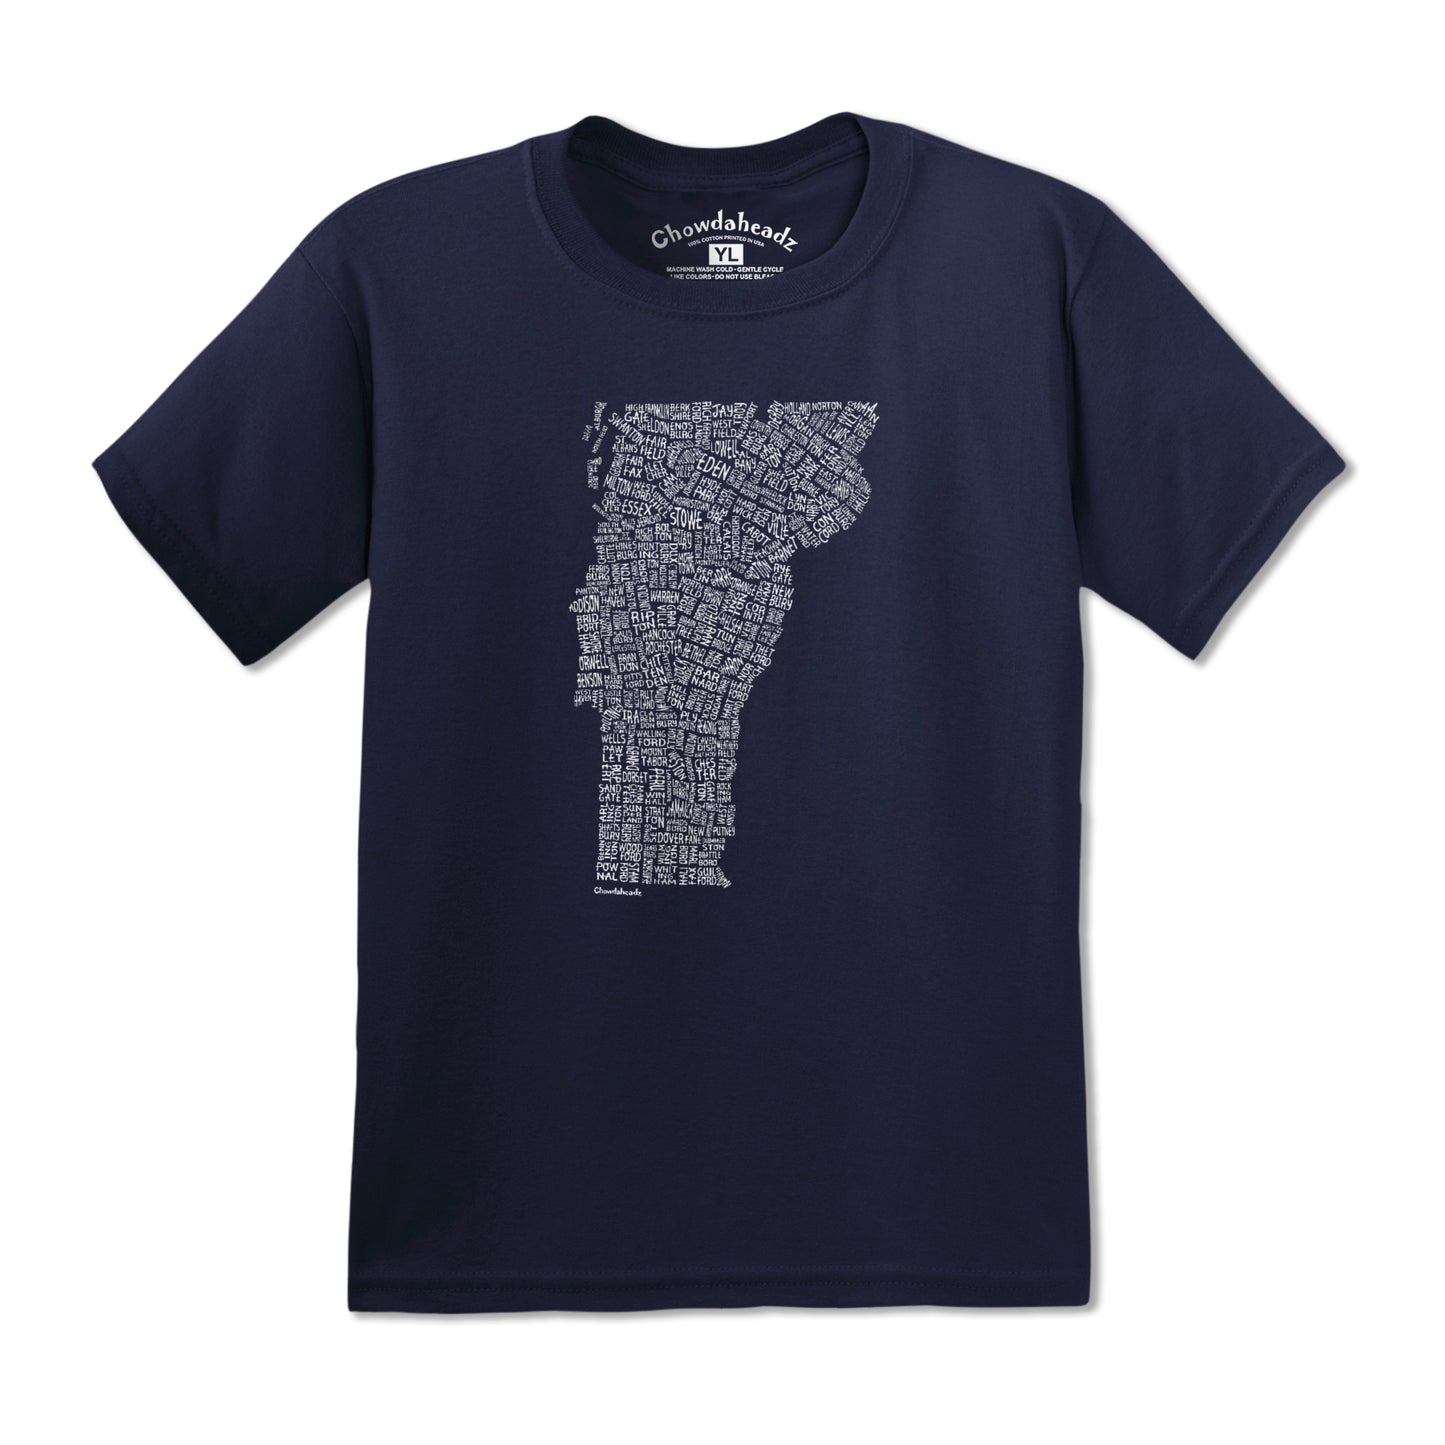 Vermont Cities & Towns Youth T-Shirt - Chowdaheadz